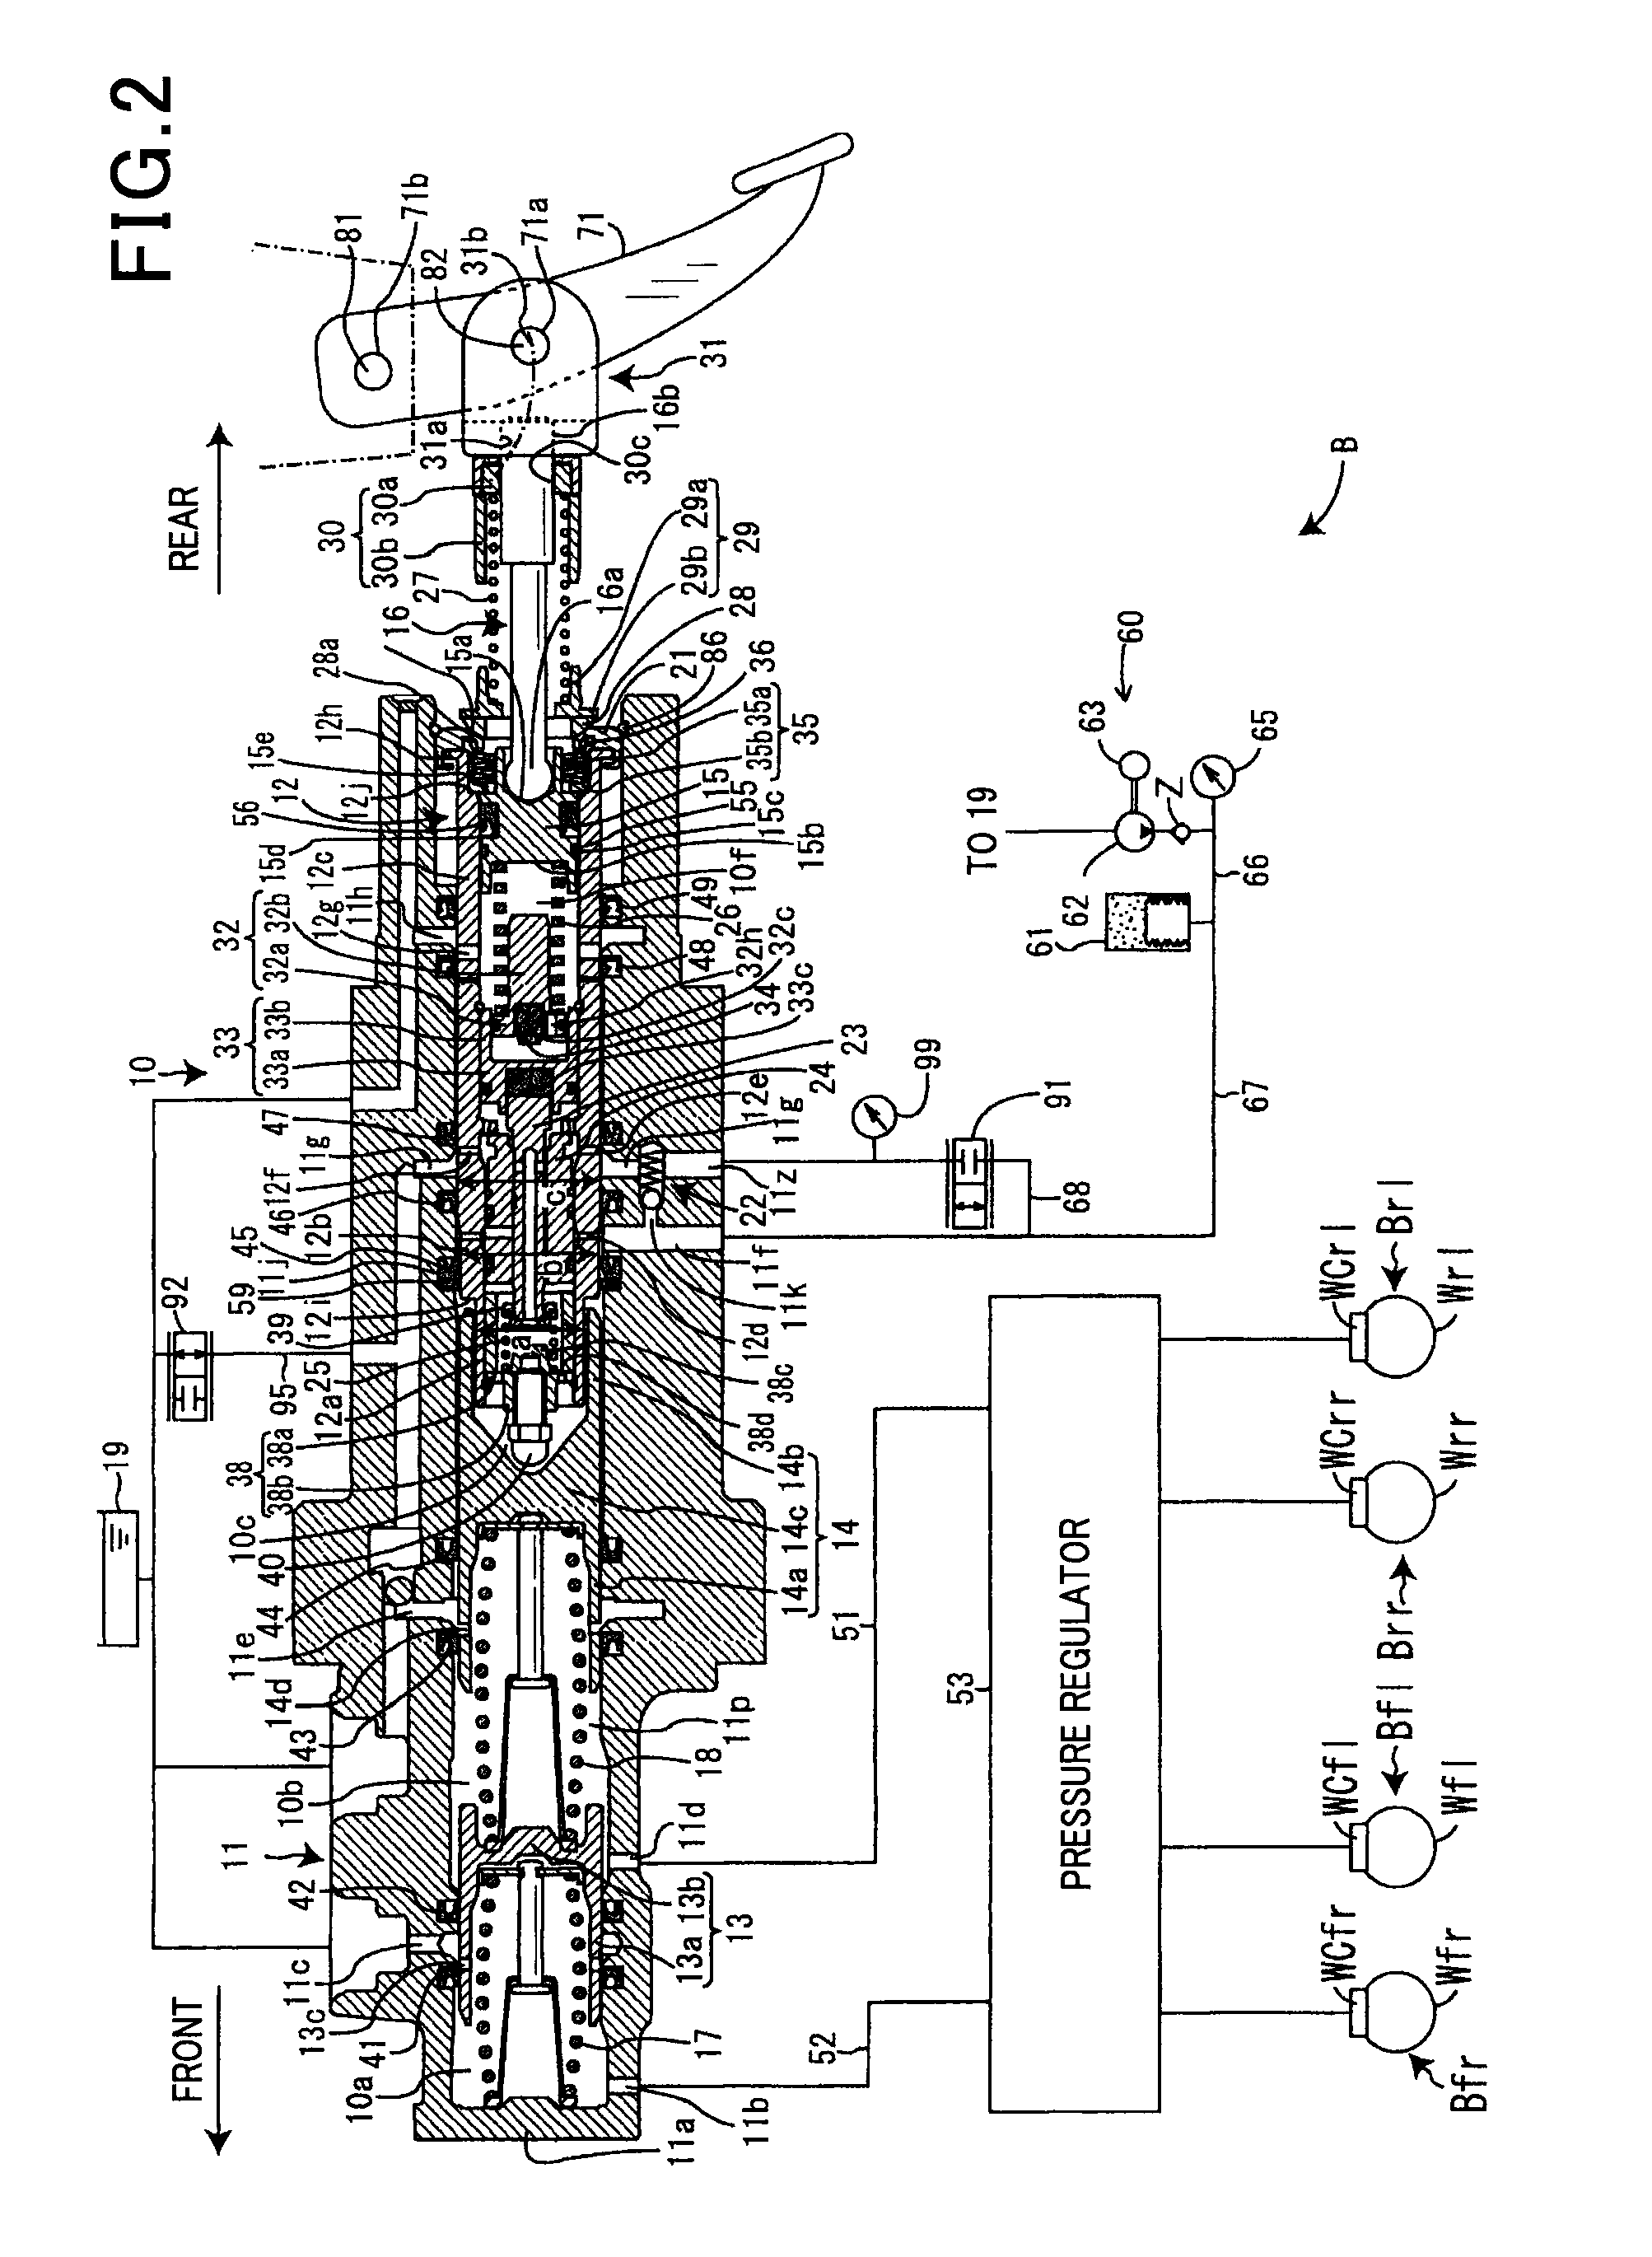 Braking apparatus for vehicle with collision avoidance mechanism